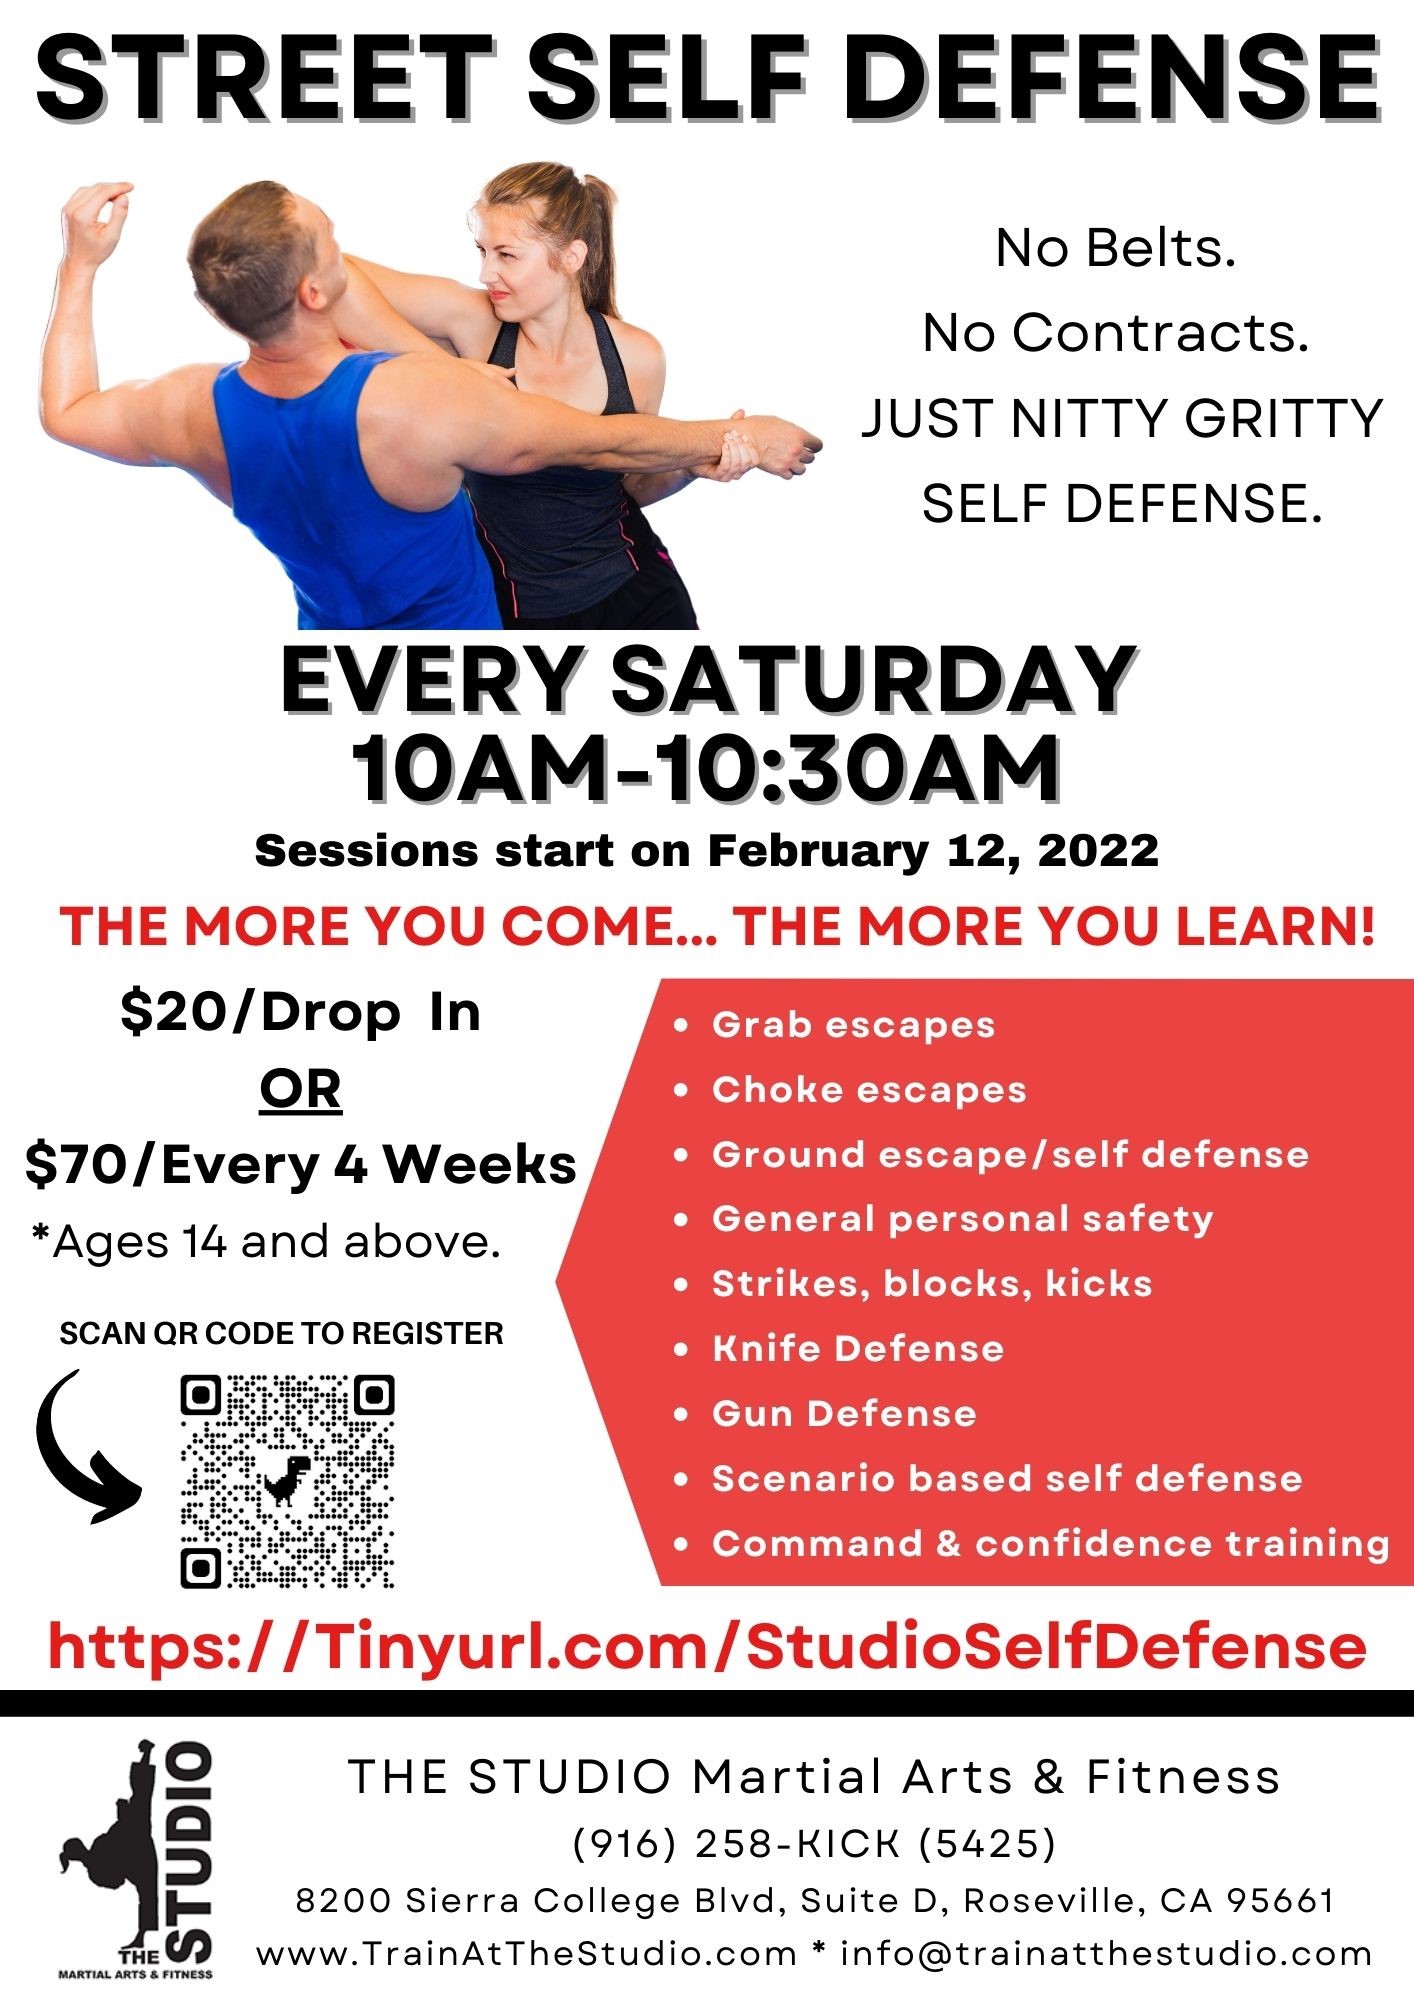 Self Defense Class For Women And Men The Studio Martial Arts Fitness